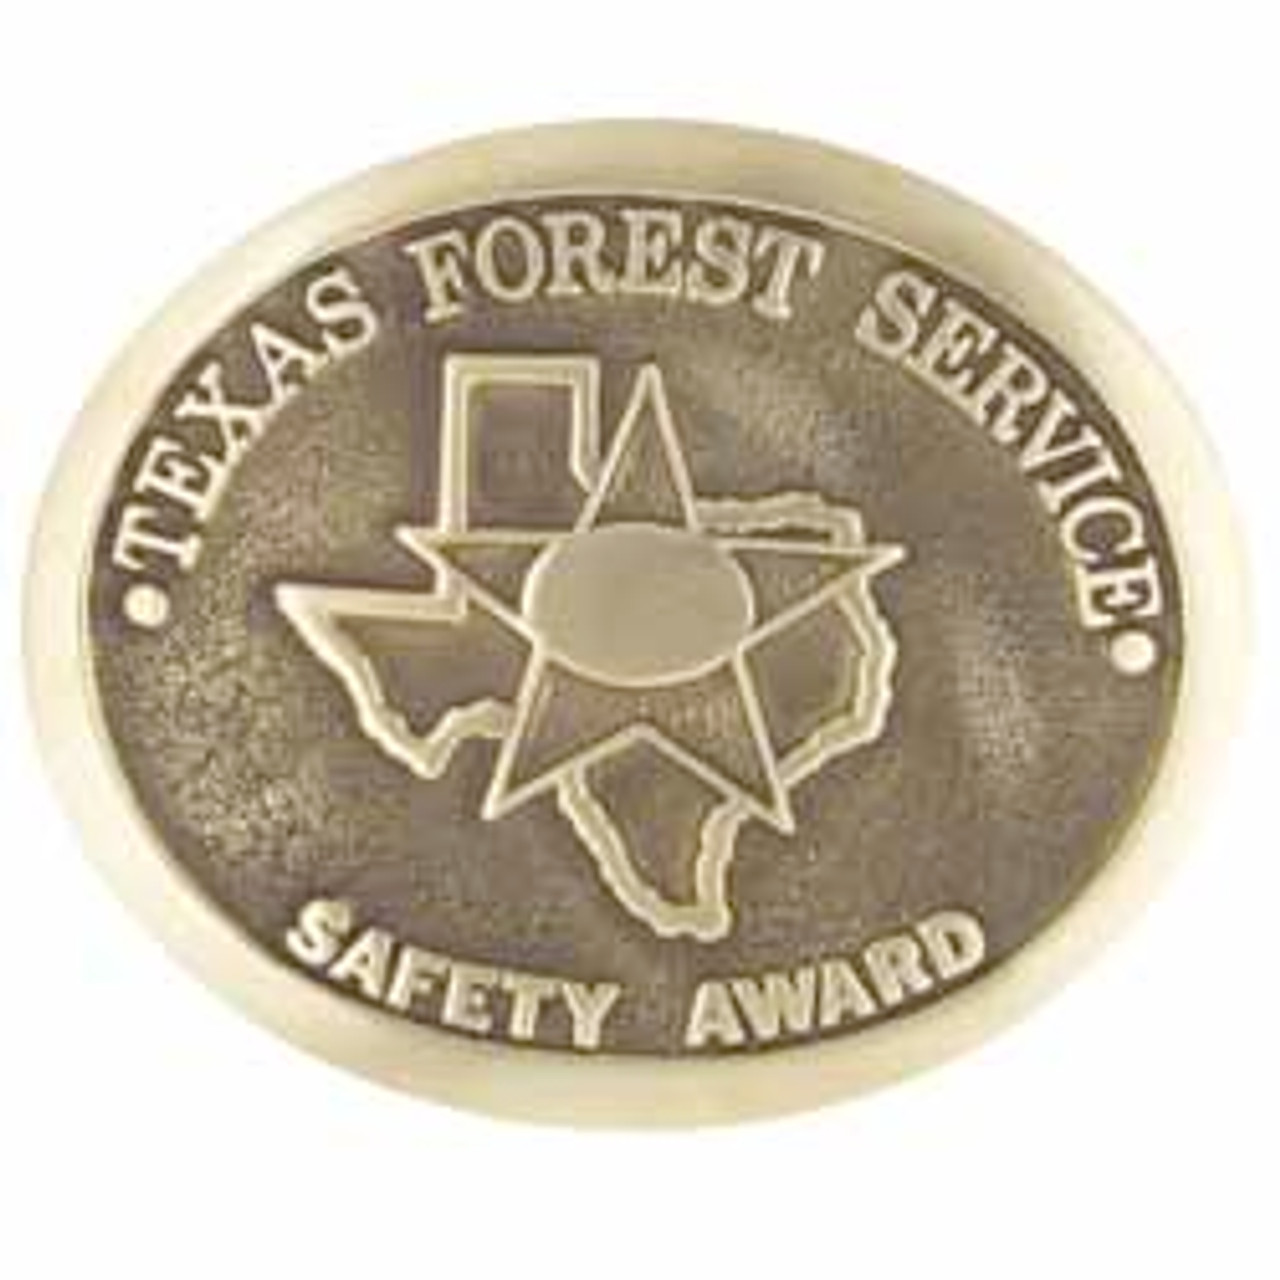 Texas Forest Service Safety Award Buckle (RESTRICTED)